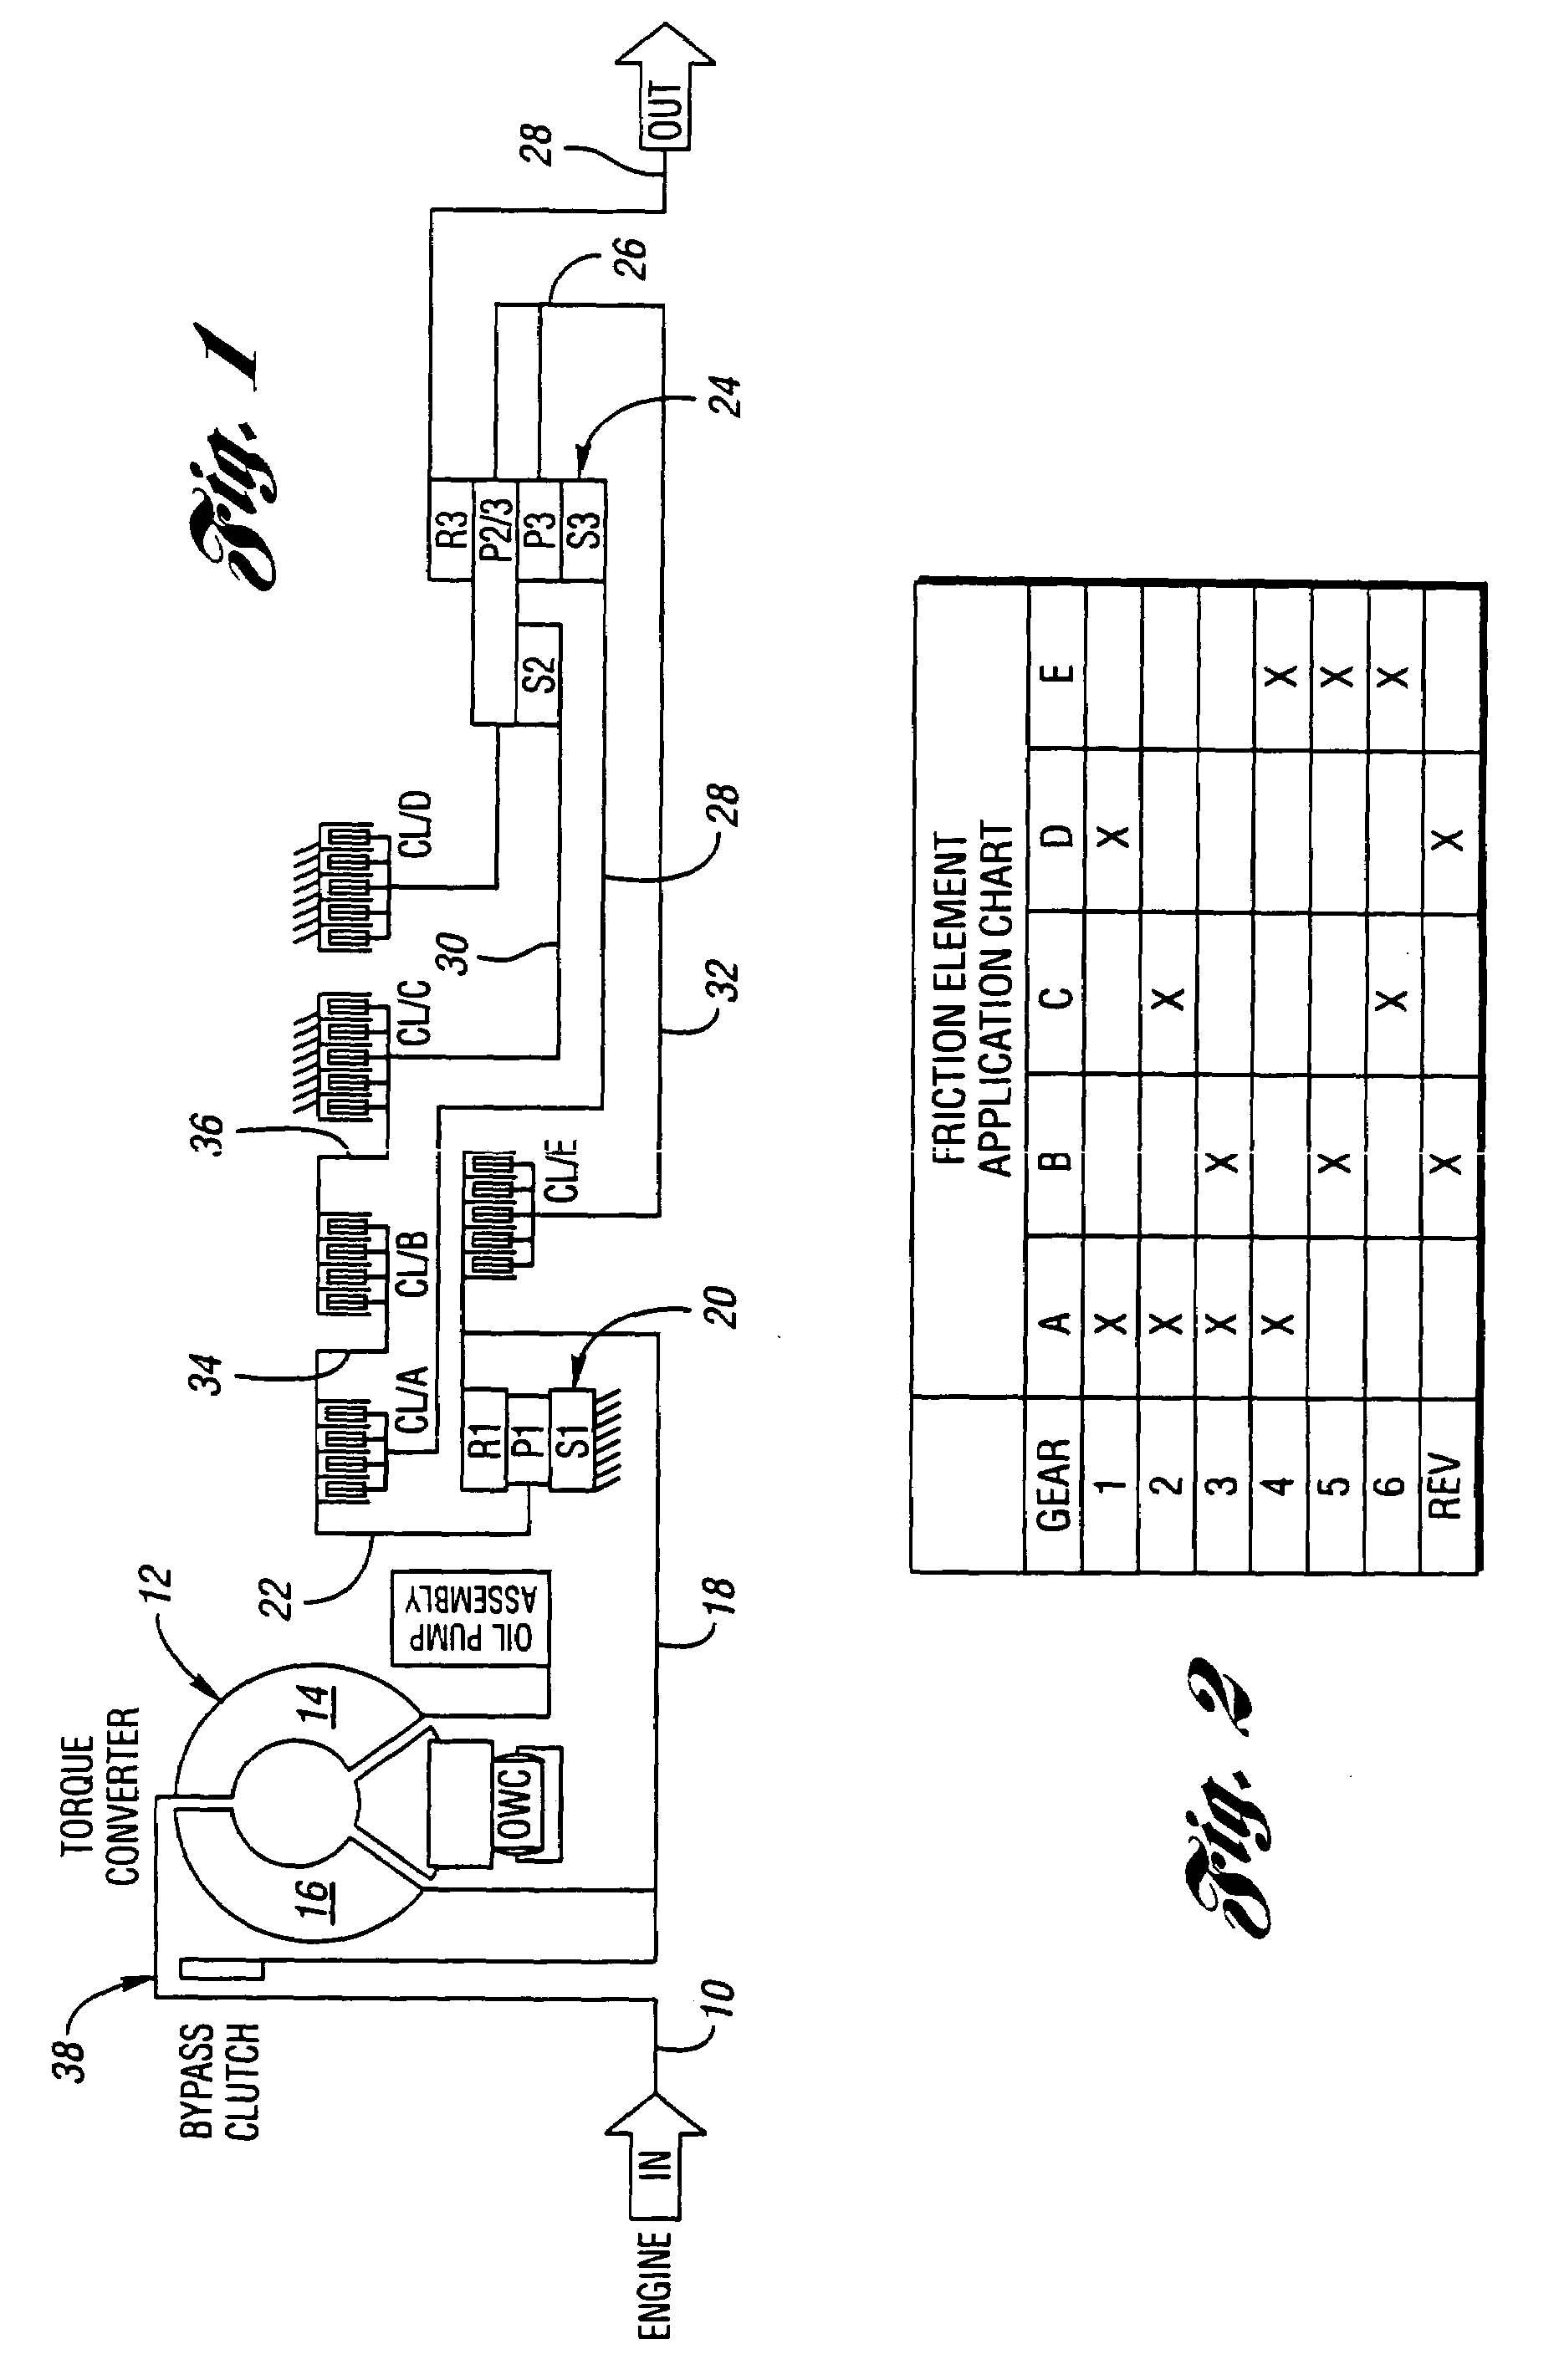 Adaptive pressure control method for synchronous downshifts in a multiple-ratio transmission